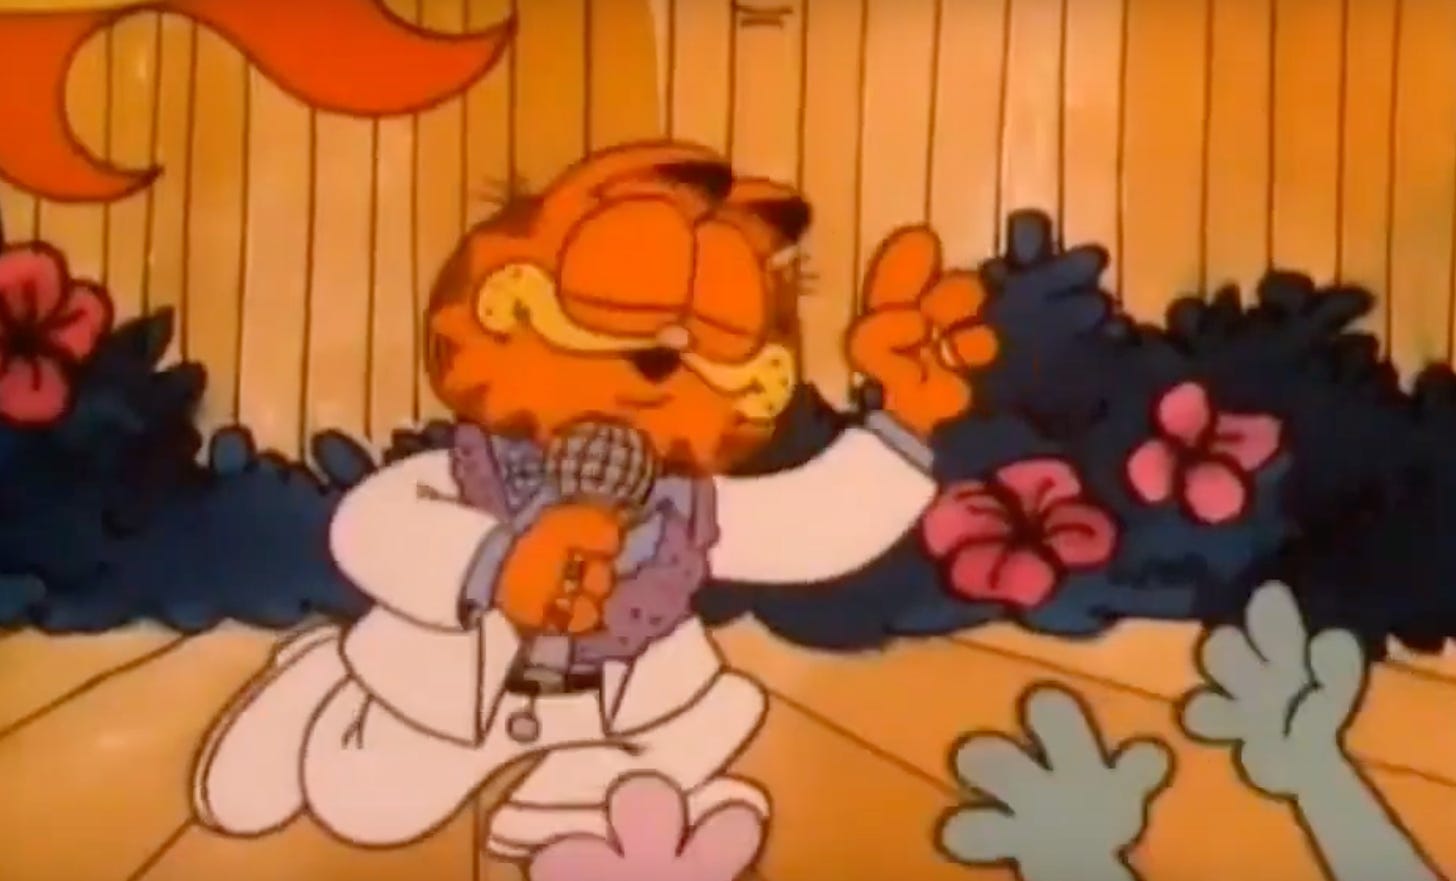 Garfield in a white suit sings into a microphone on a tropical stage with flowers as admiring fans reach out their paws toward him.